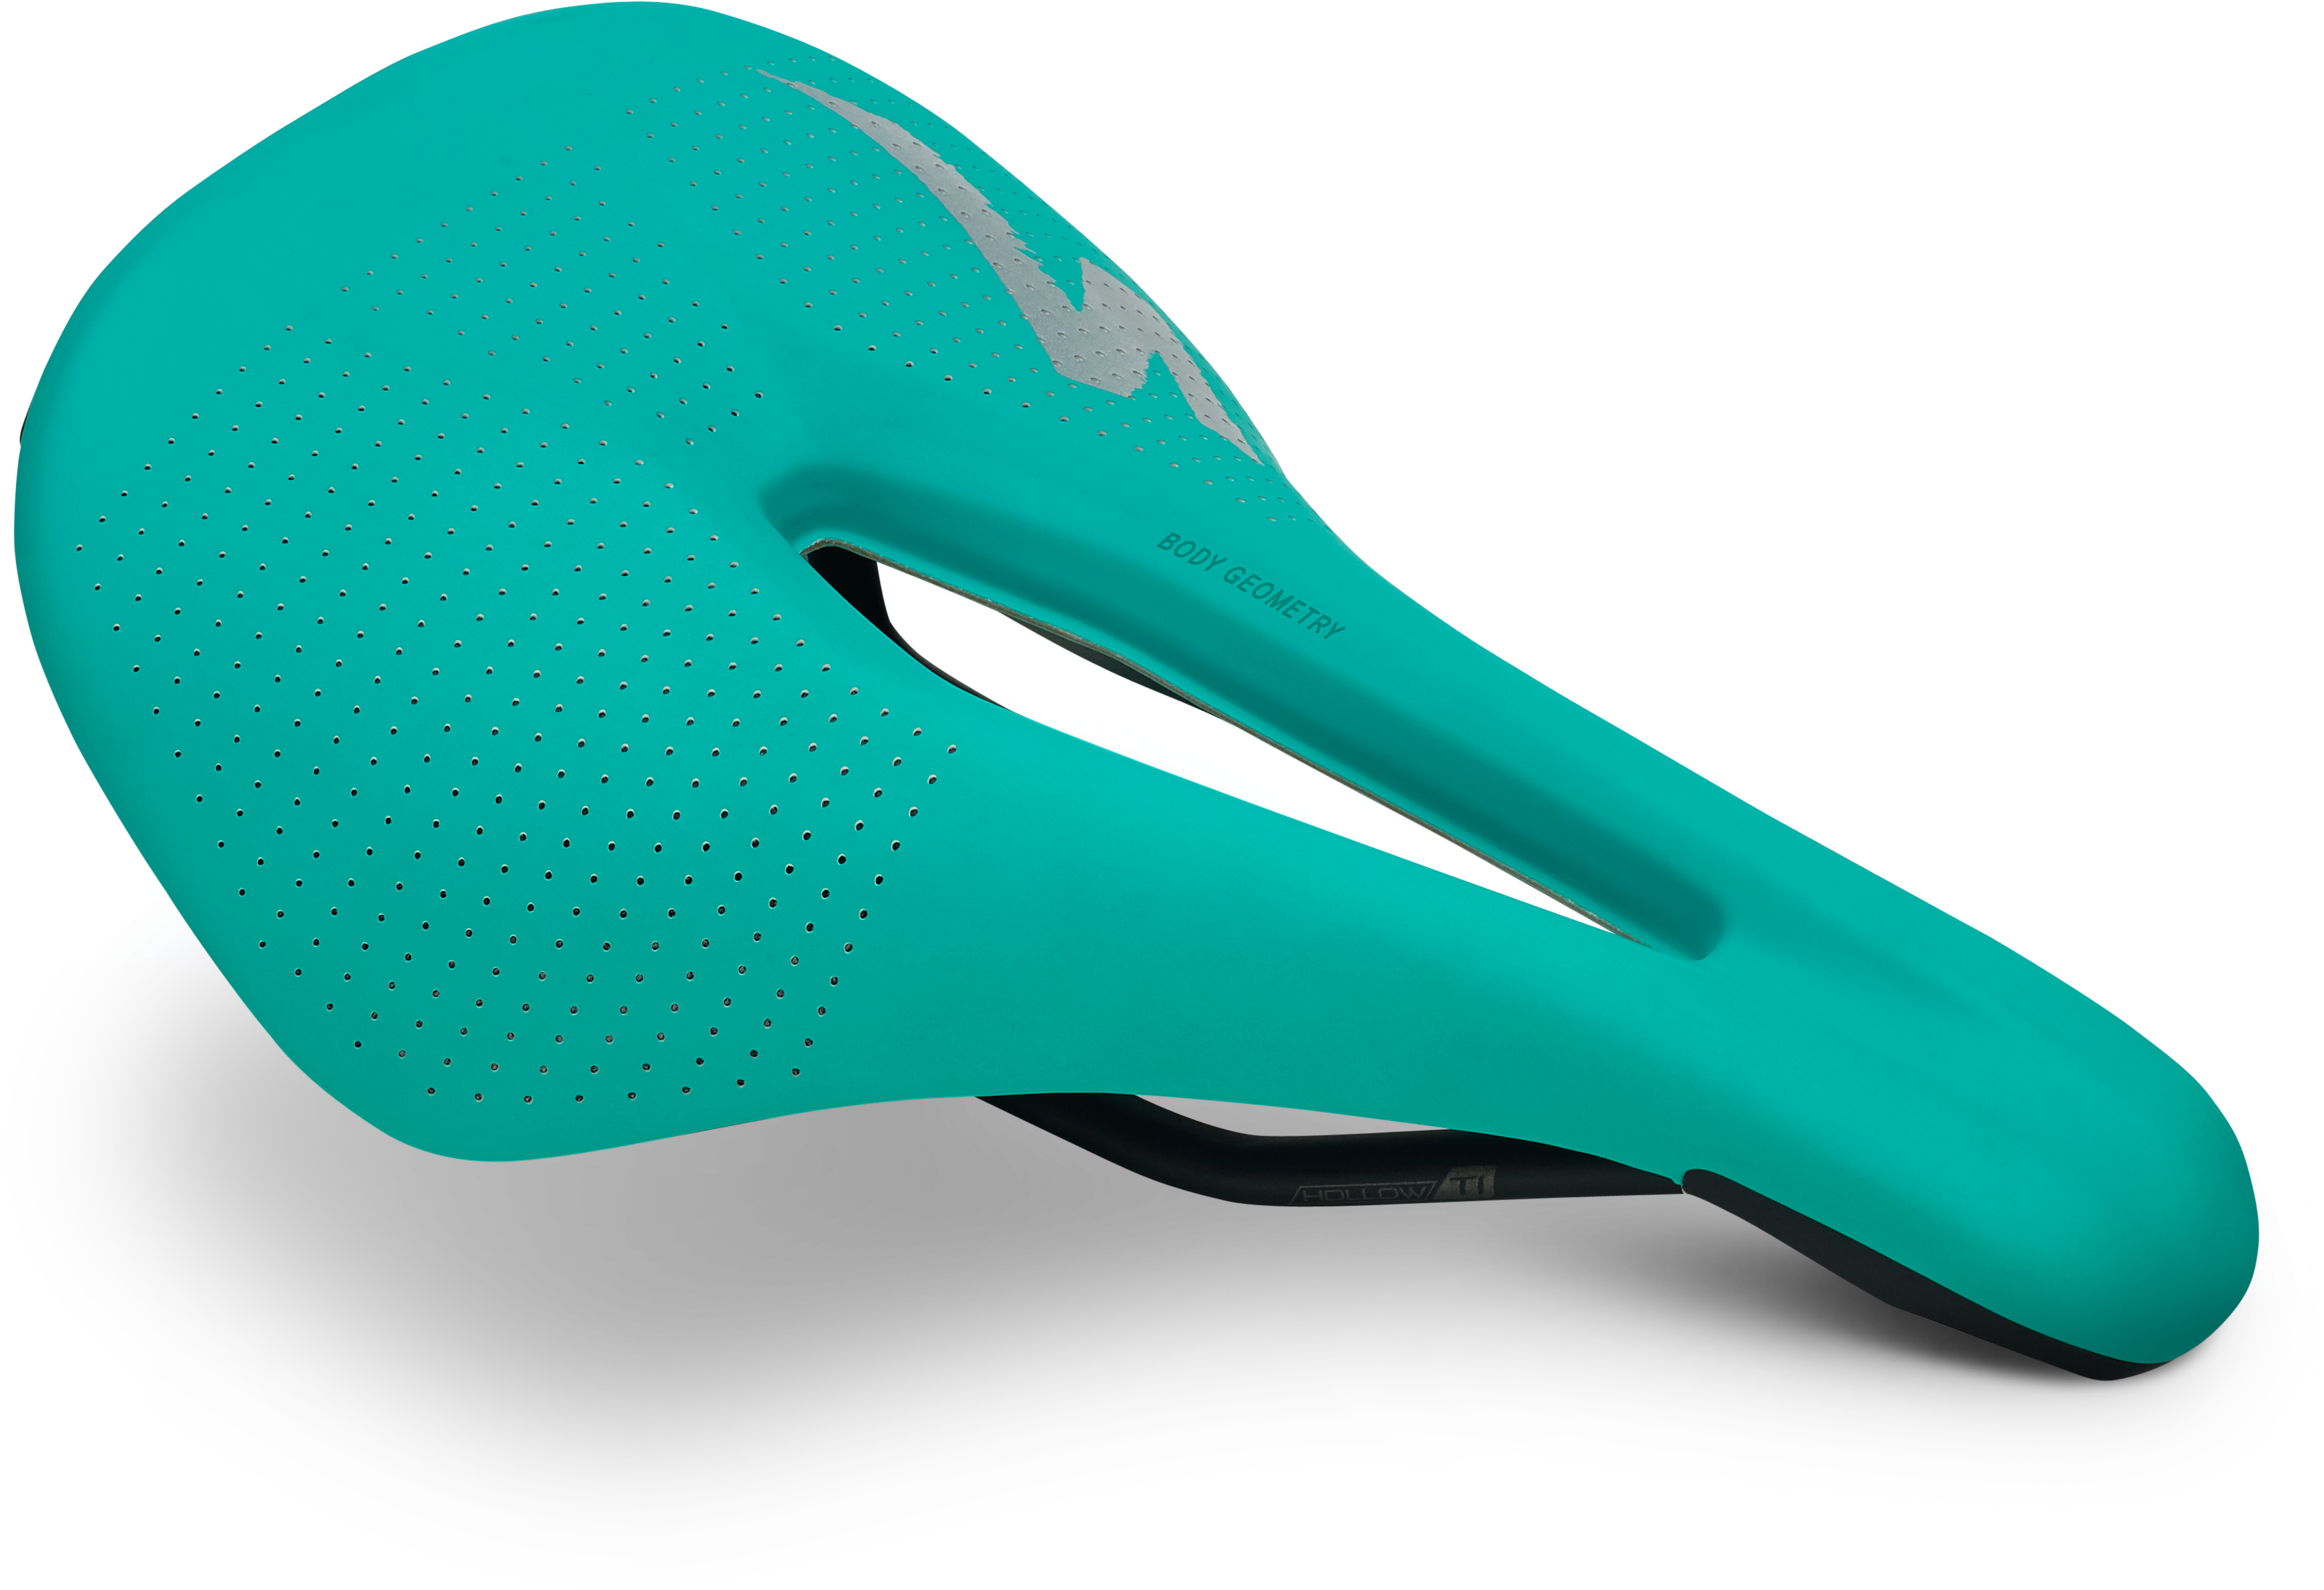 SPECIALIZED POWER EXPERT SADDLE 143mm